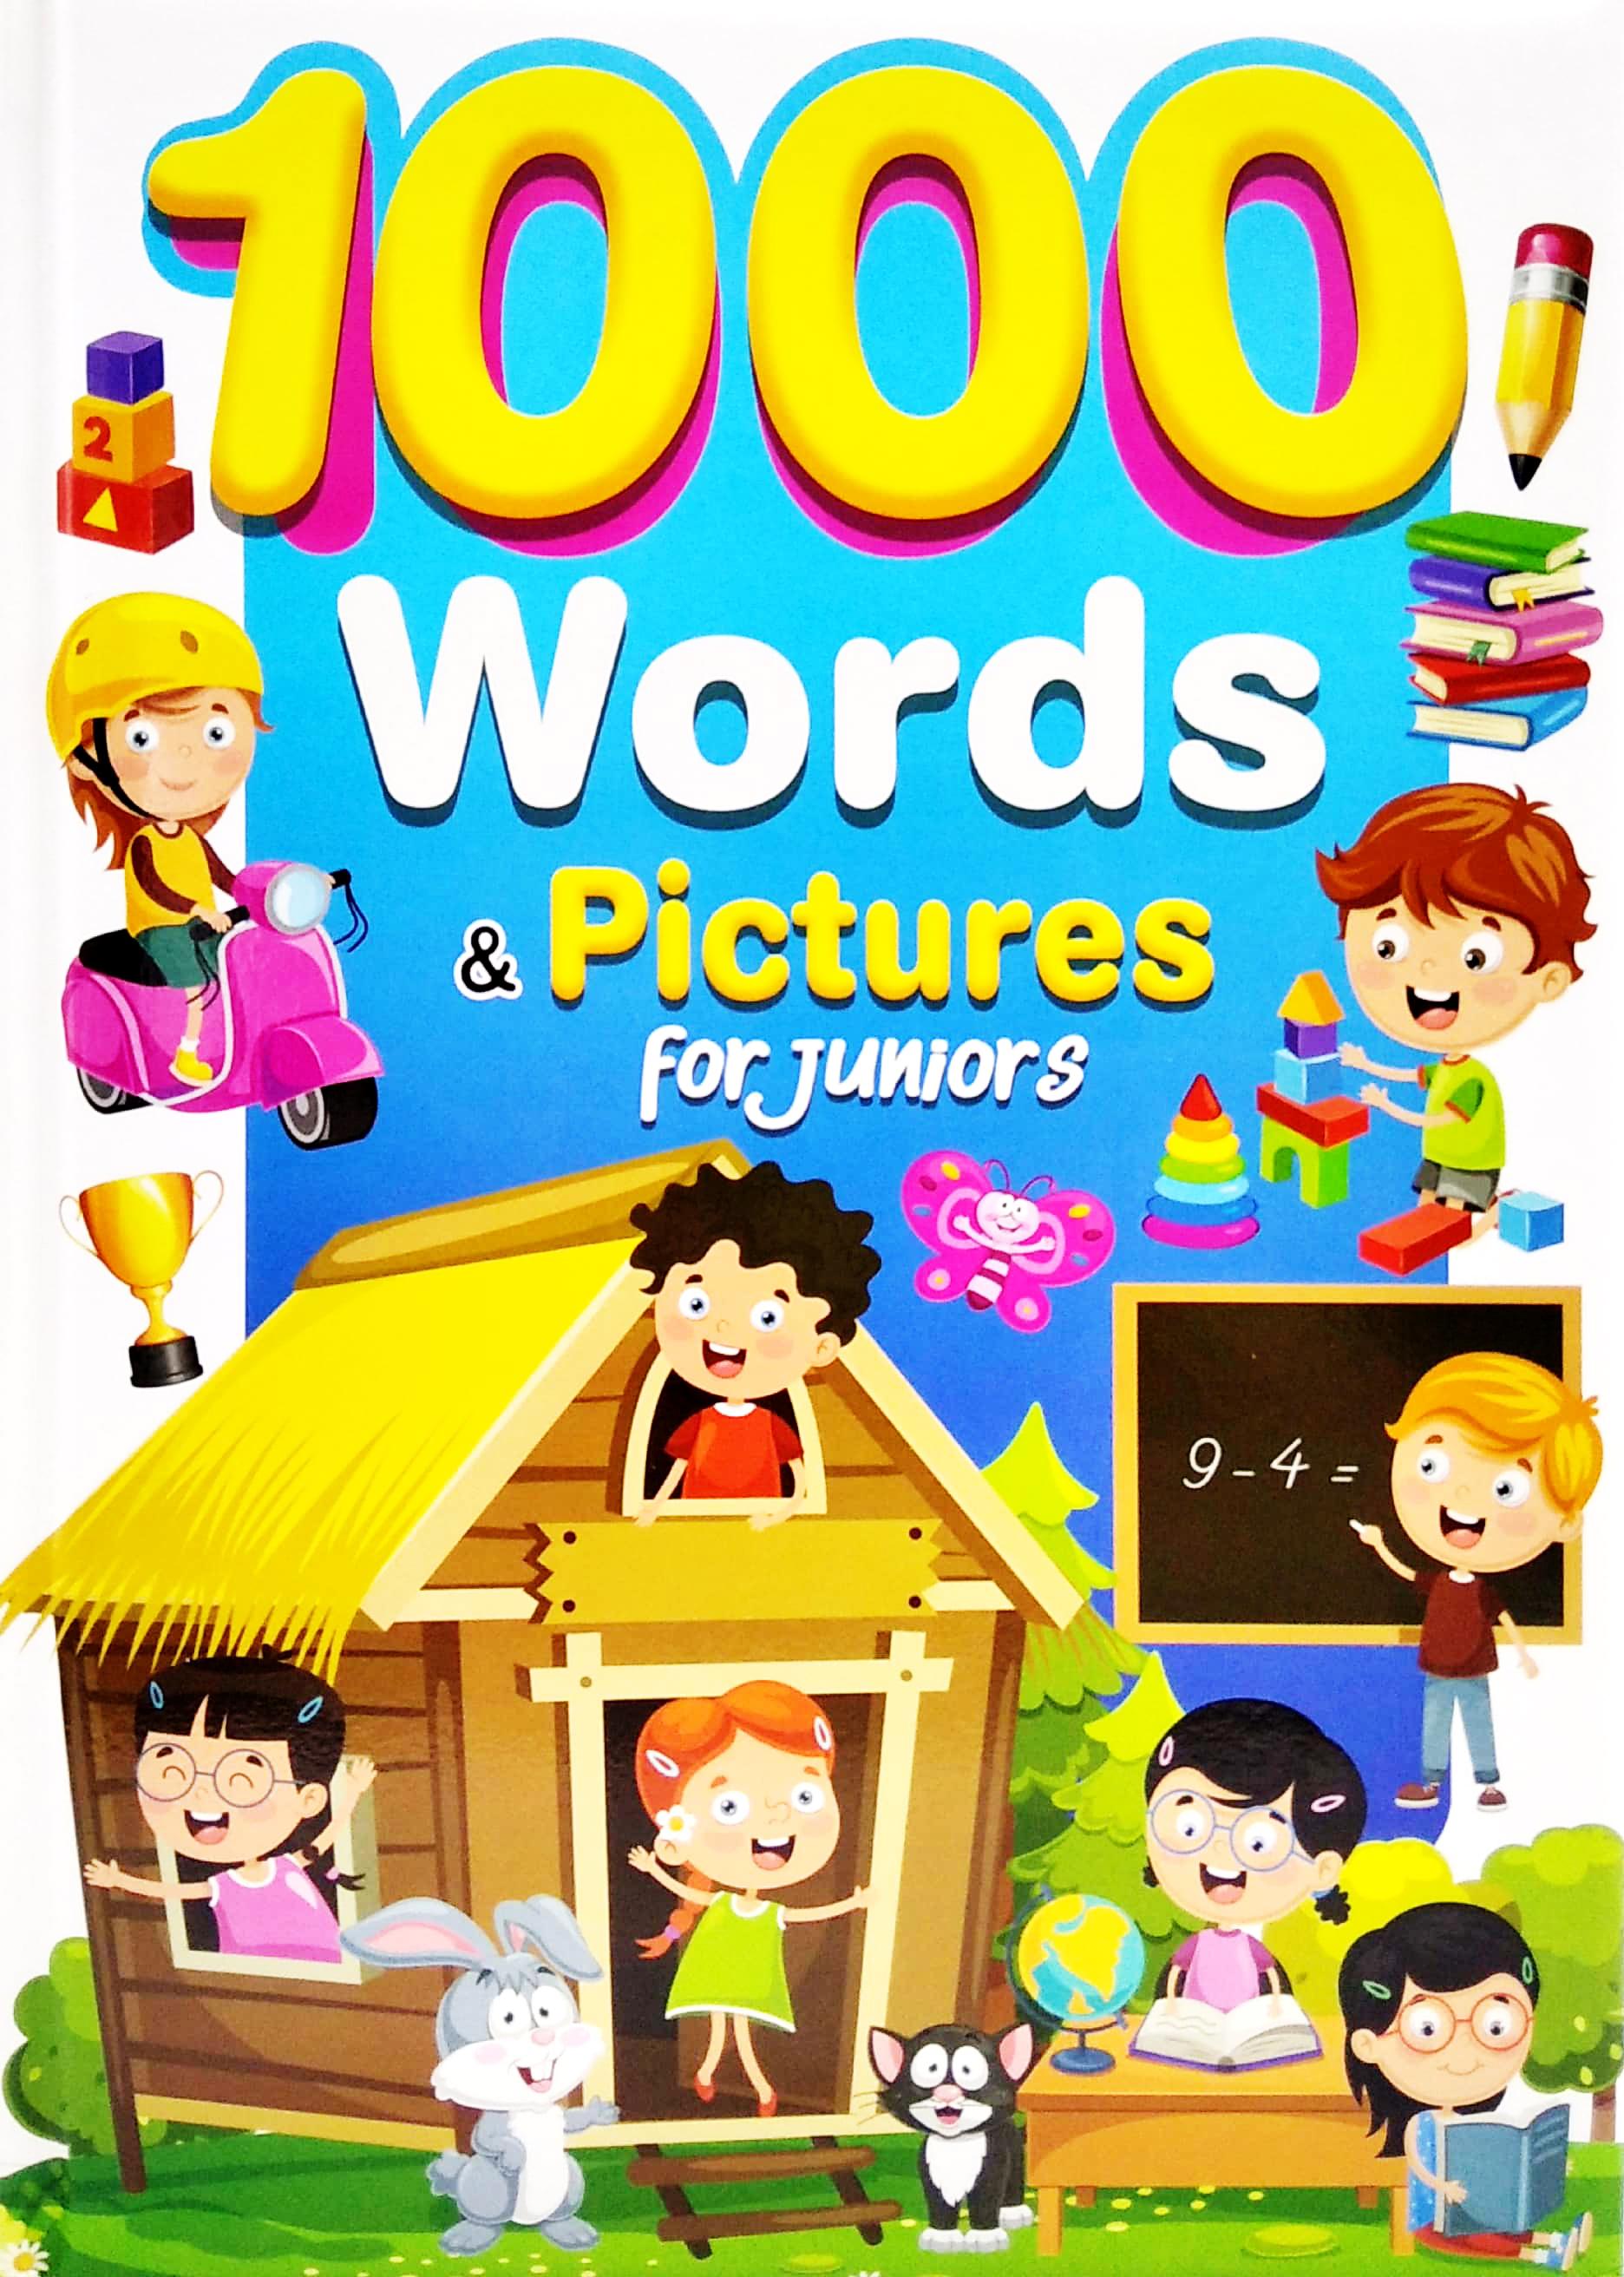 1000 Words & Pictures For Juniors